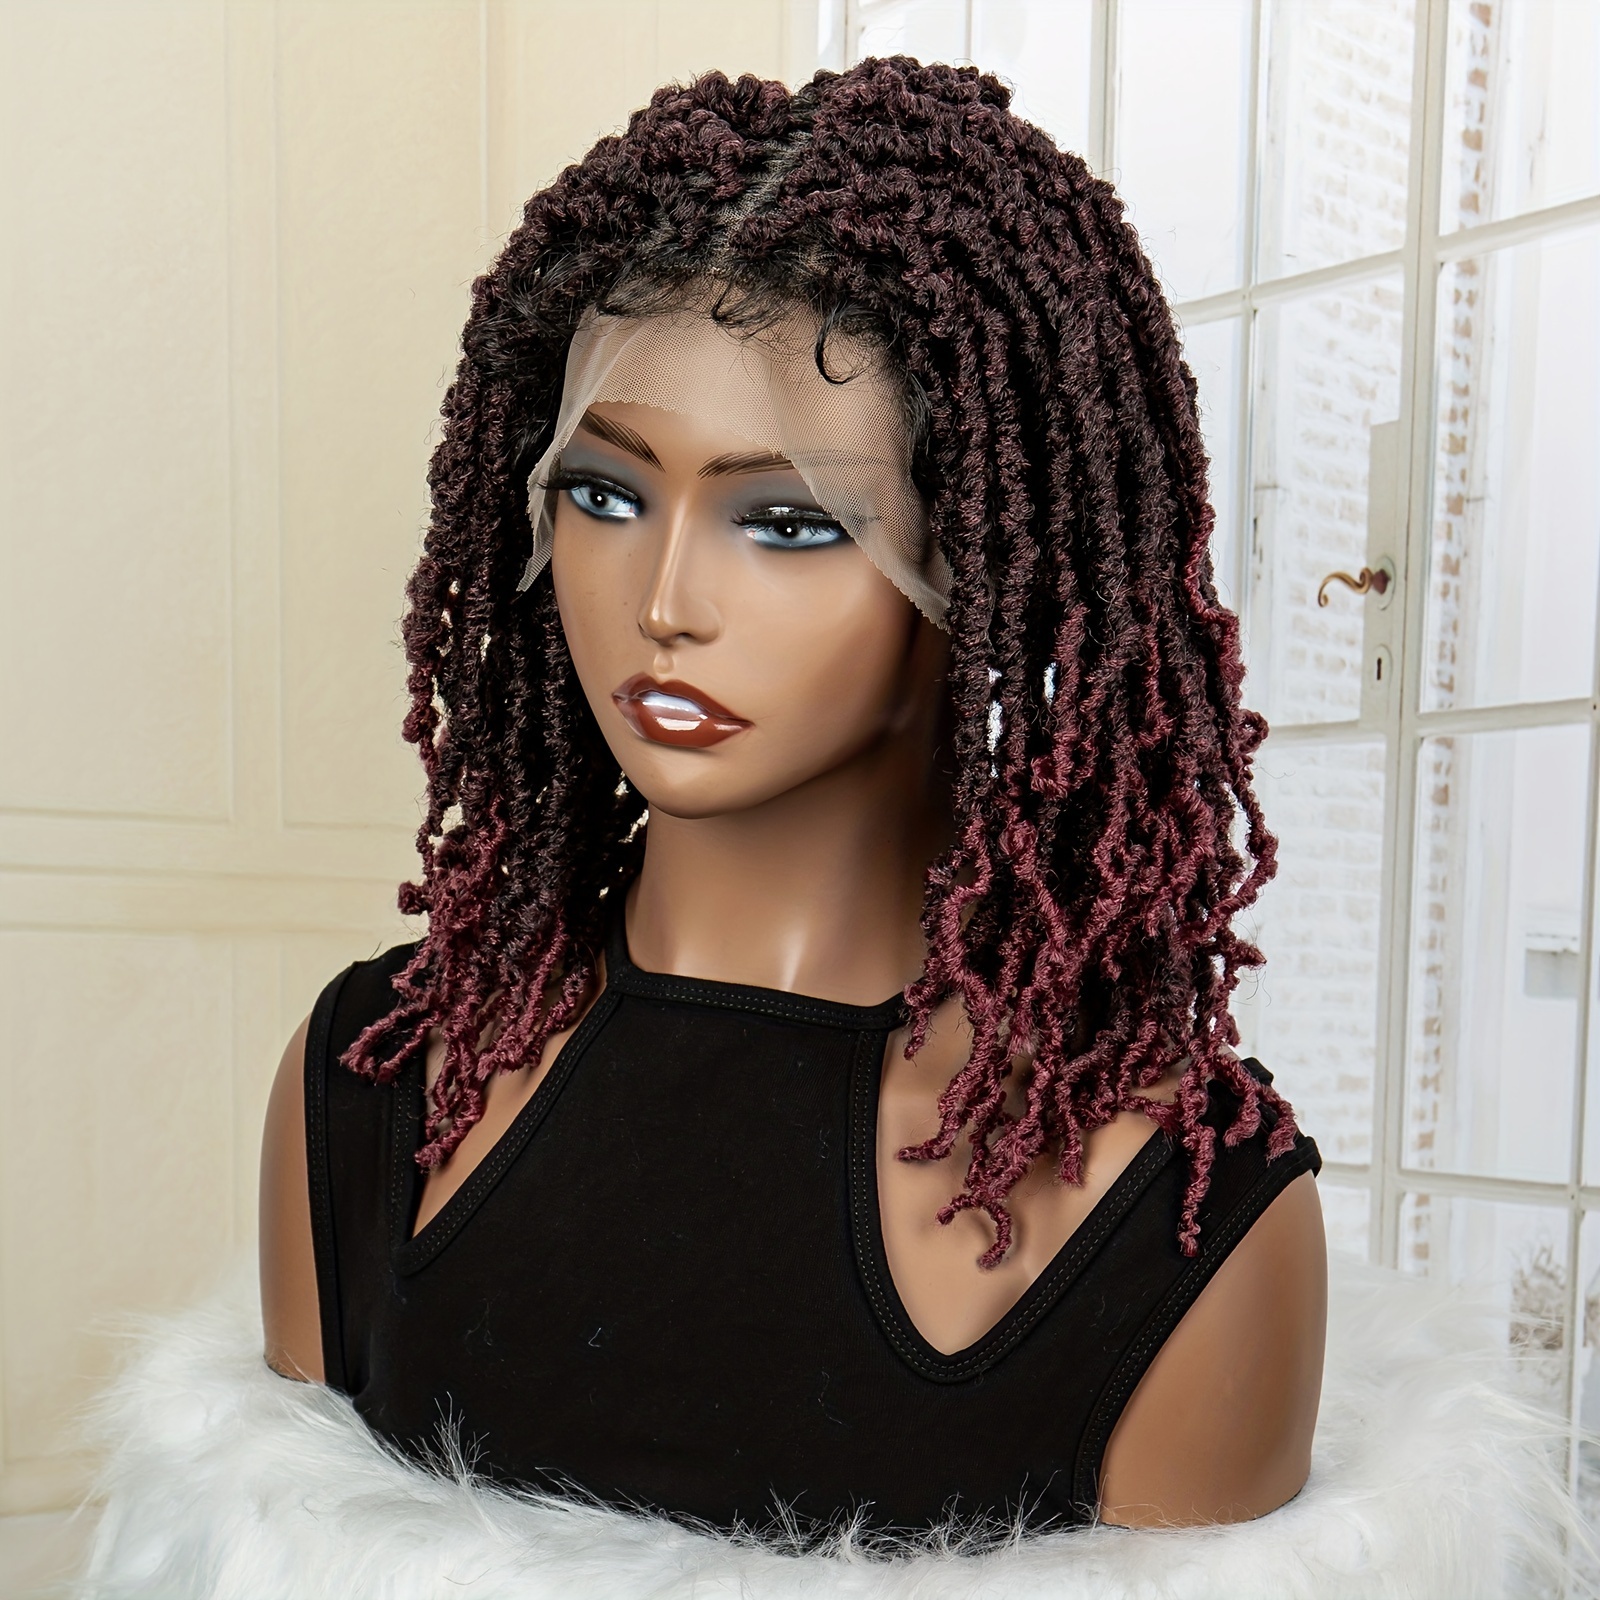  Long Crochet Briads For Women 22 Inch 8 Packs Goddess Box  Braids Crochet Hair With Curly Ends Pre Looped Boho Box Braids Bohemian  Goddess Braids Crochet Hair (22 Inch (Pack